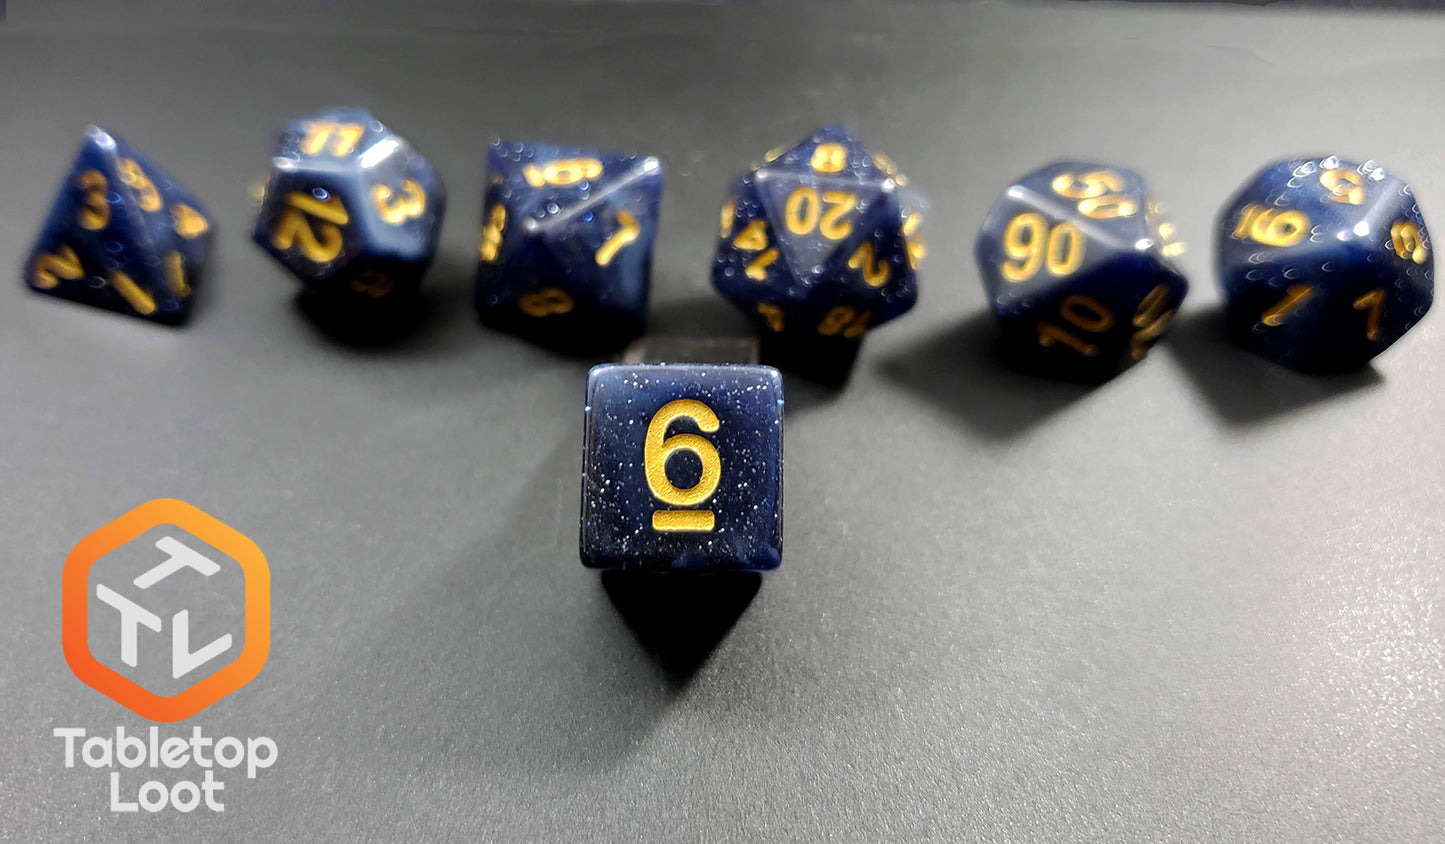 A close up of the D6 from the Starry Twilight 7 piece dice set from Tabletop Loot, with an opaque deep navy resin filled with gold glitter and inked in gold.